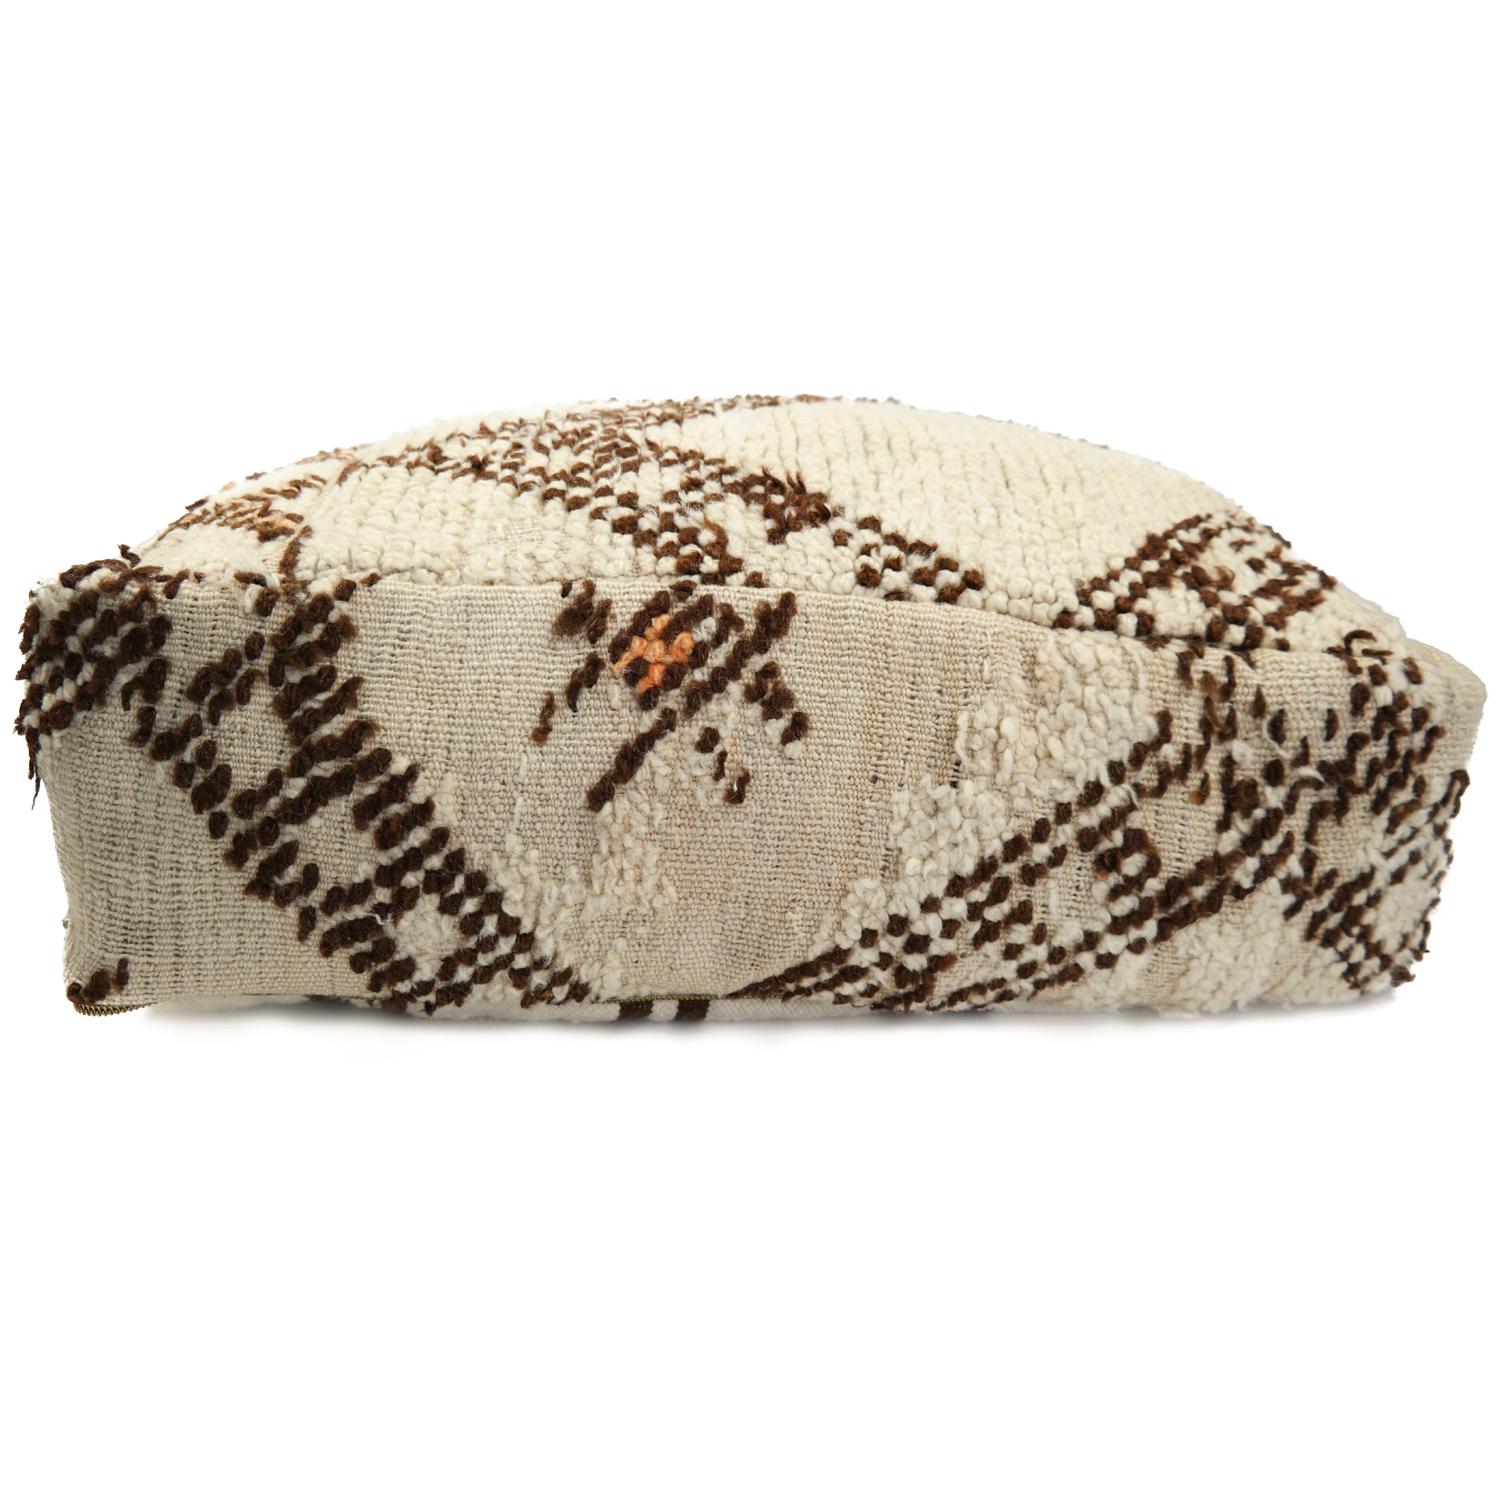 Beni Ourain pouf

Make your space completely unique with this gorgeous custom designed Moroccan Beni Ourain pouf.

This Moroccan pouf is made from a beautiful authentic vintage Beni Ourain rug. The old rugs are beautiful because of their life